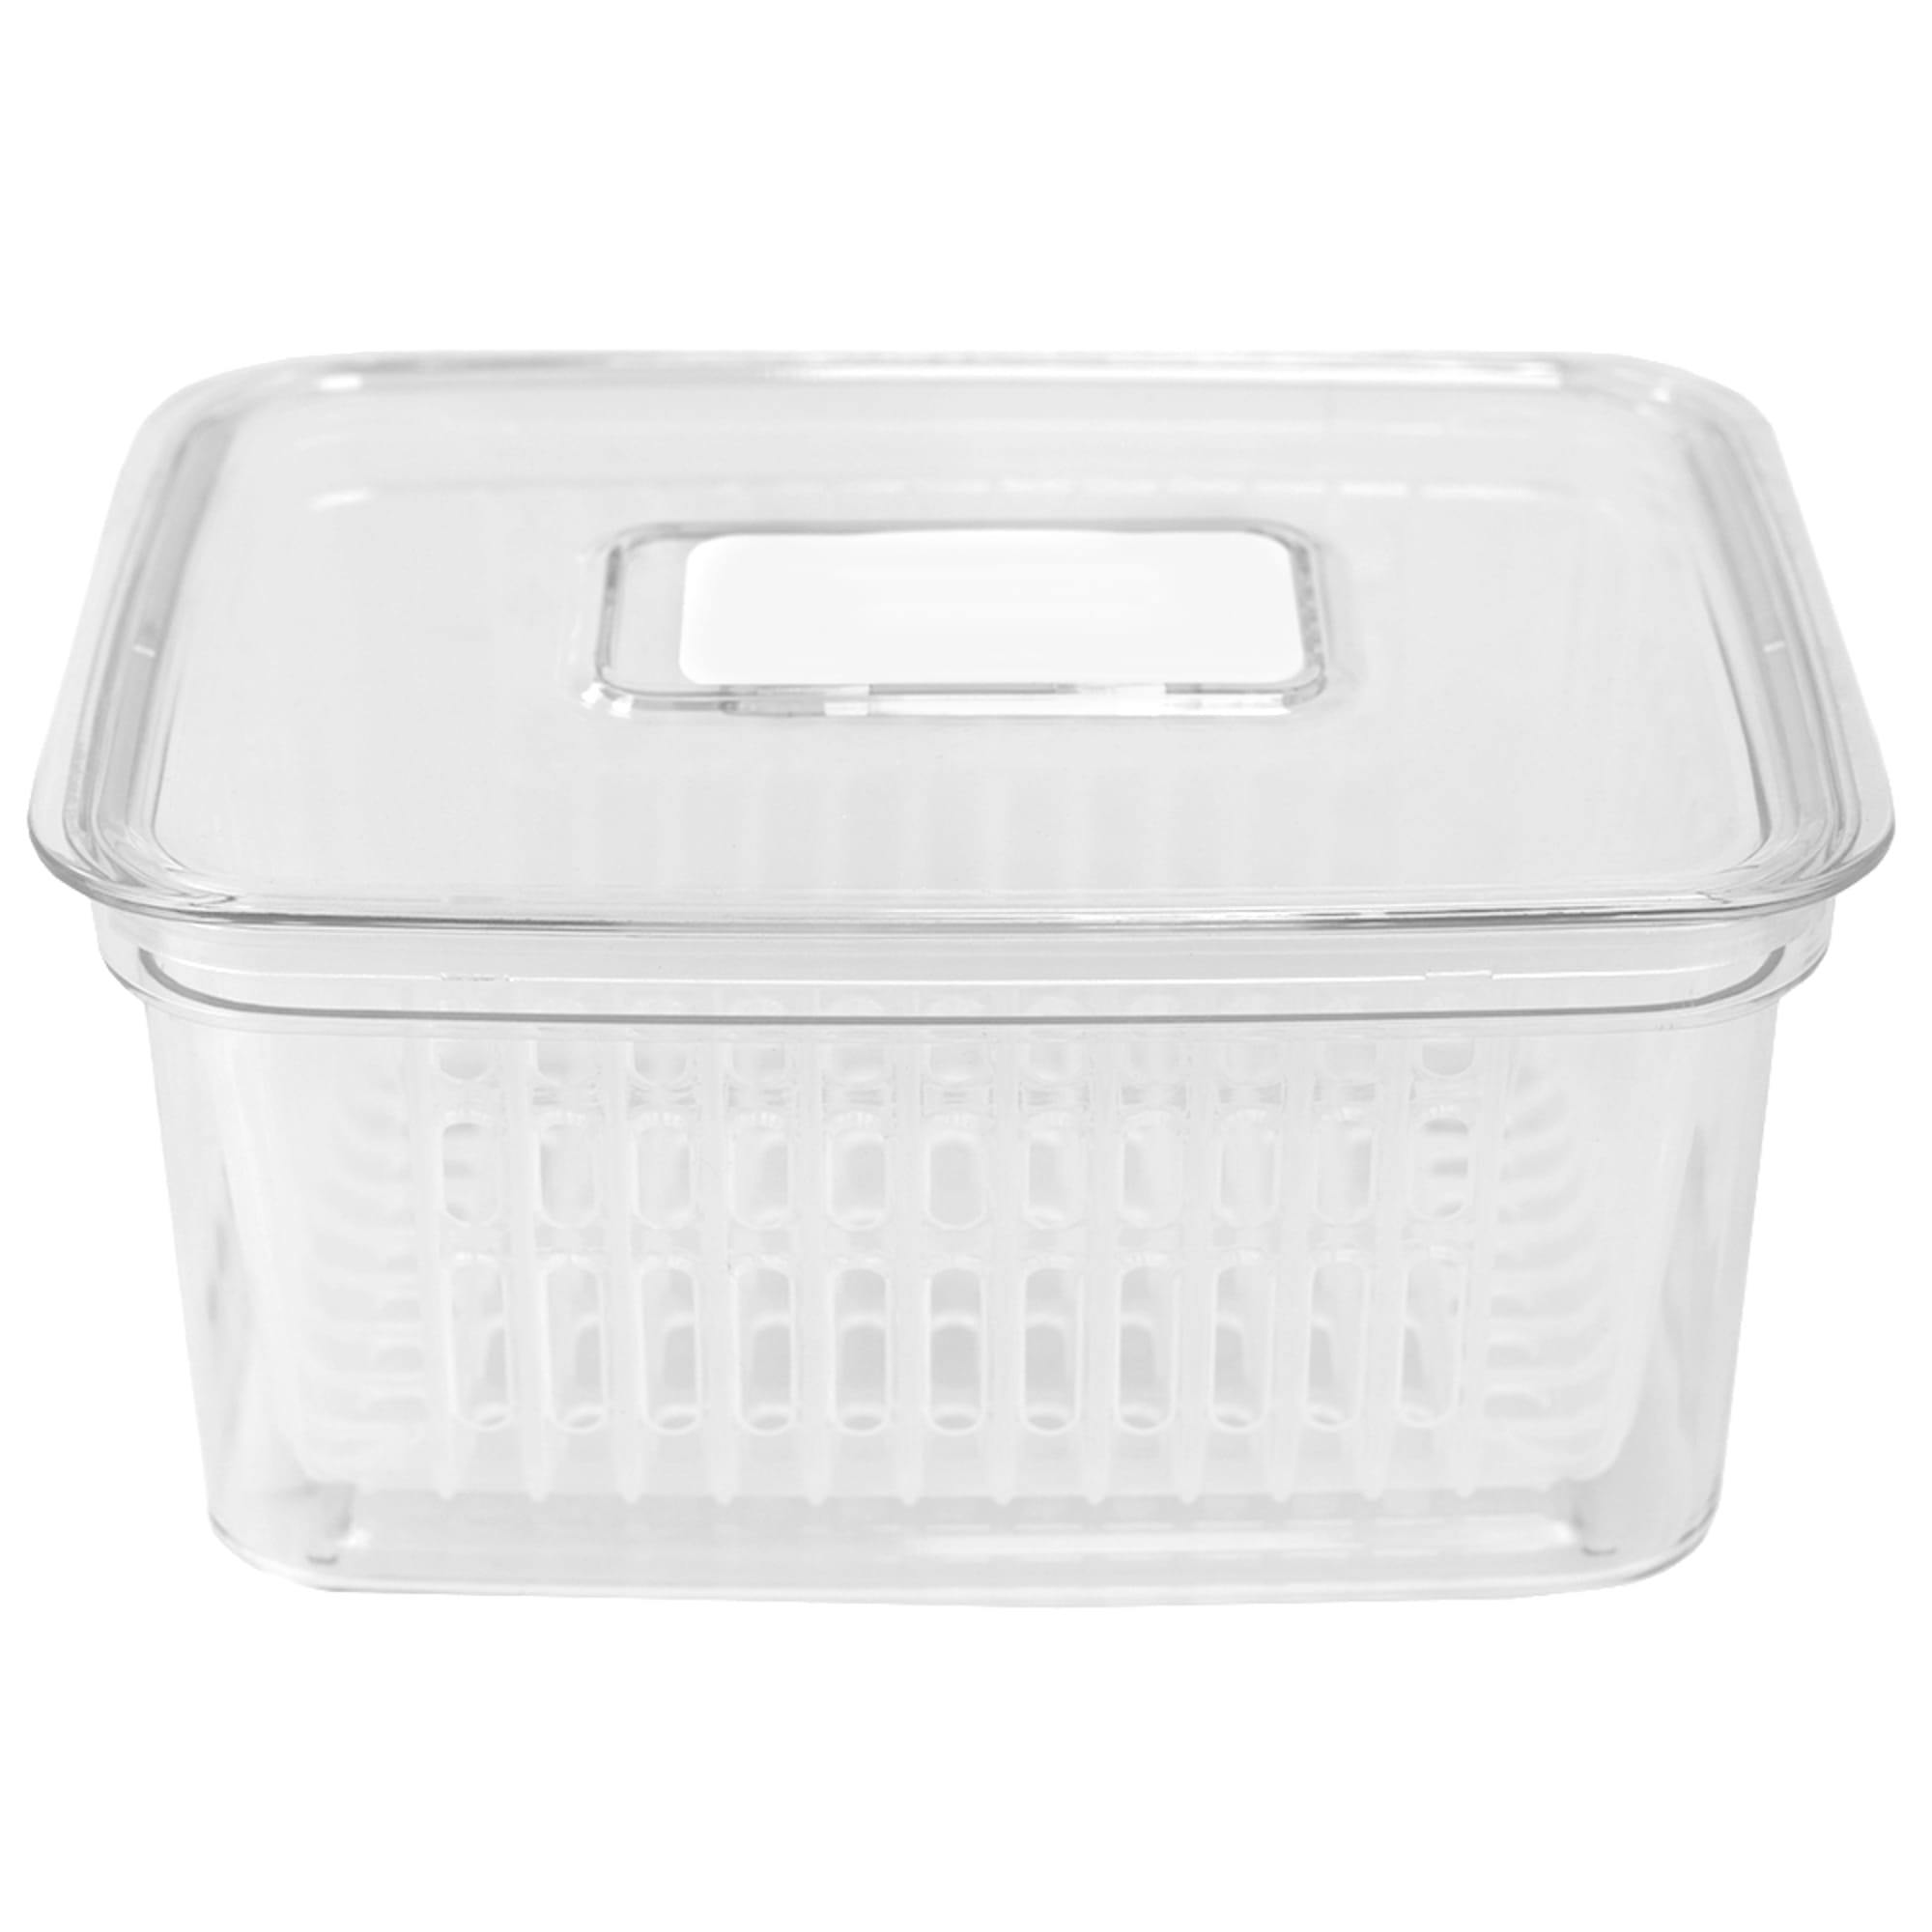 Home Basics Small Produce Saver with Removable Colander, Clear $4.00 EACH, CASE PACK OF 12